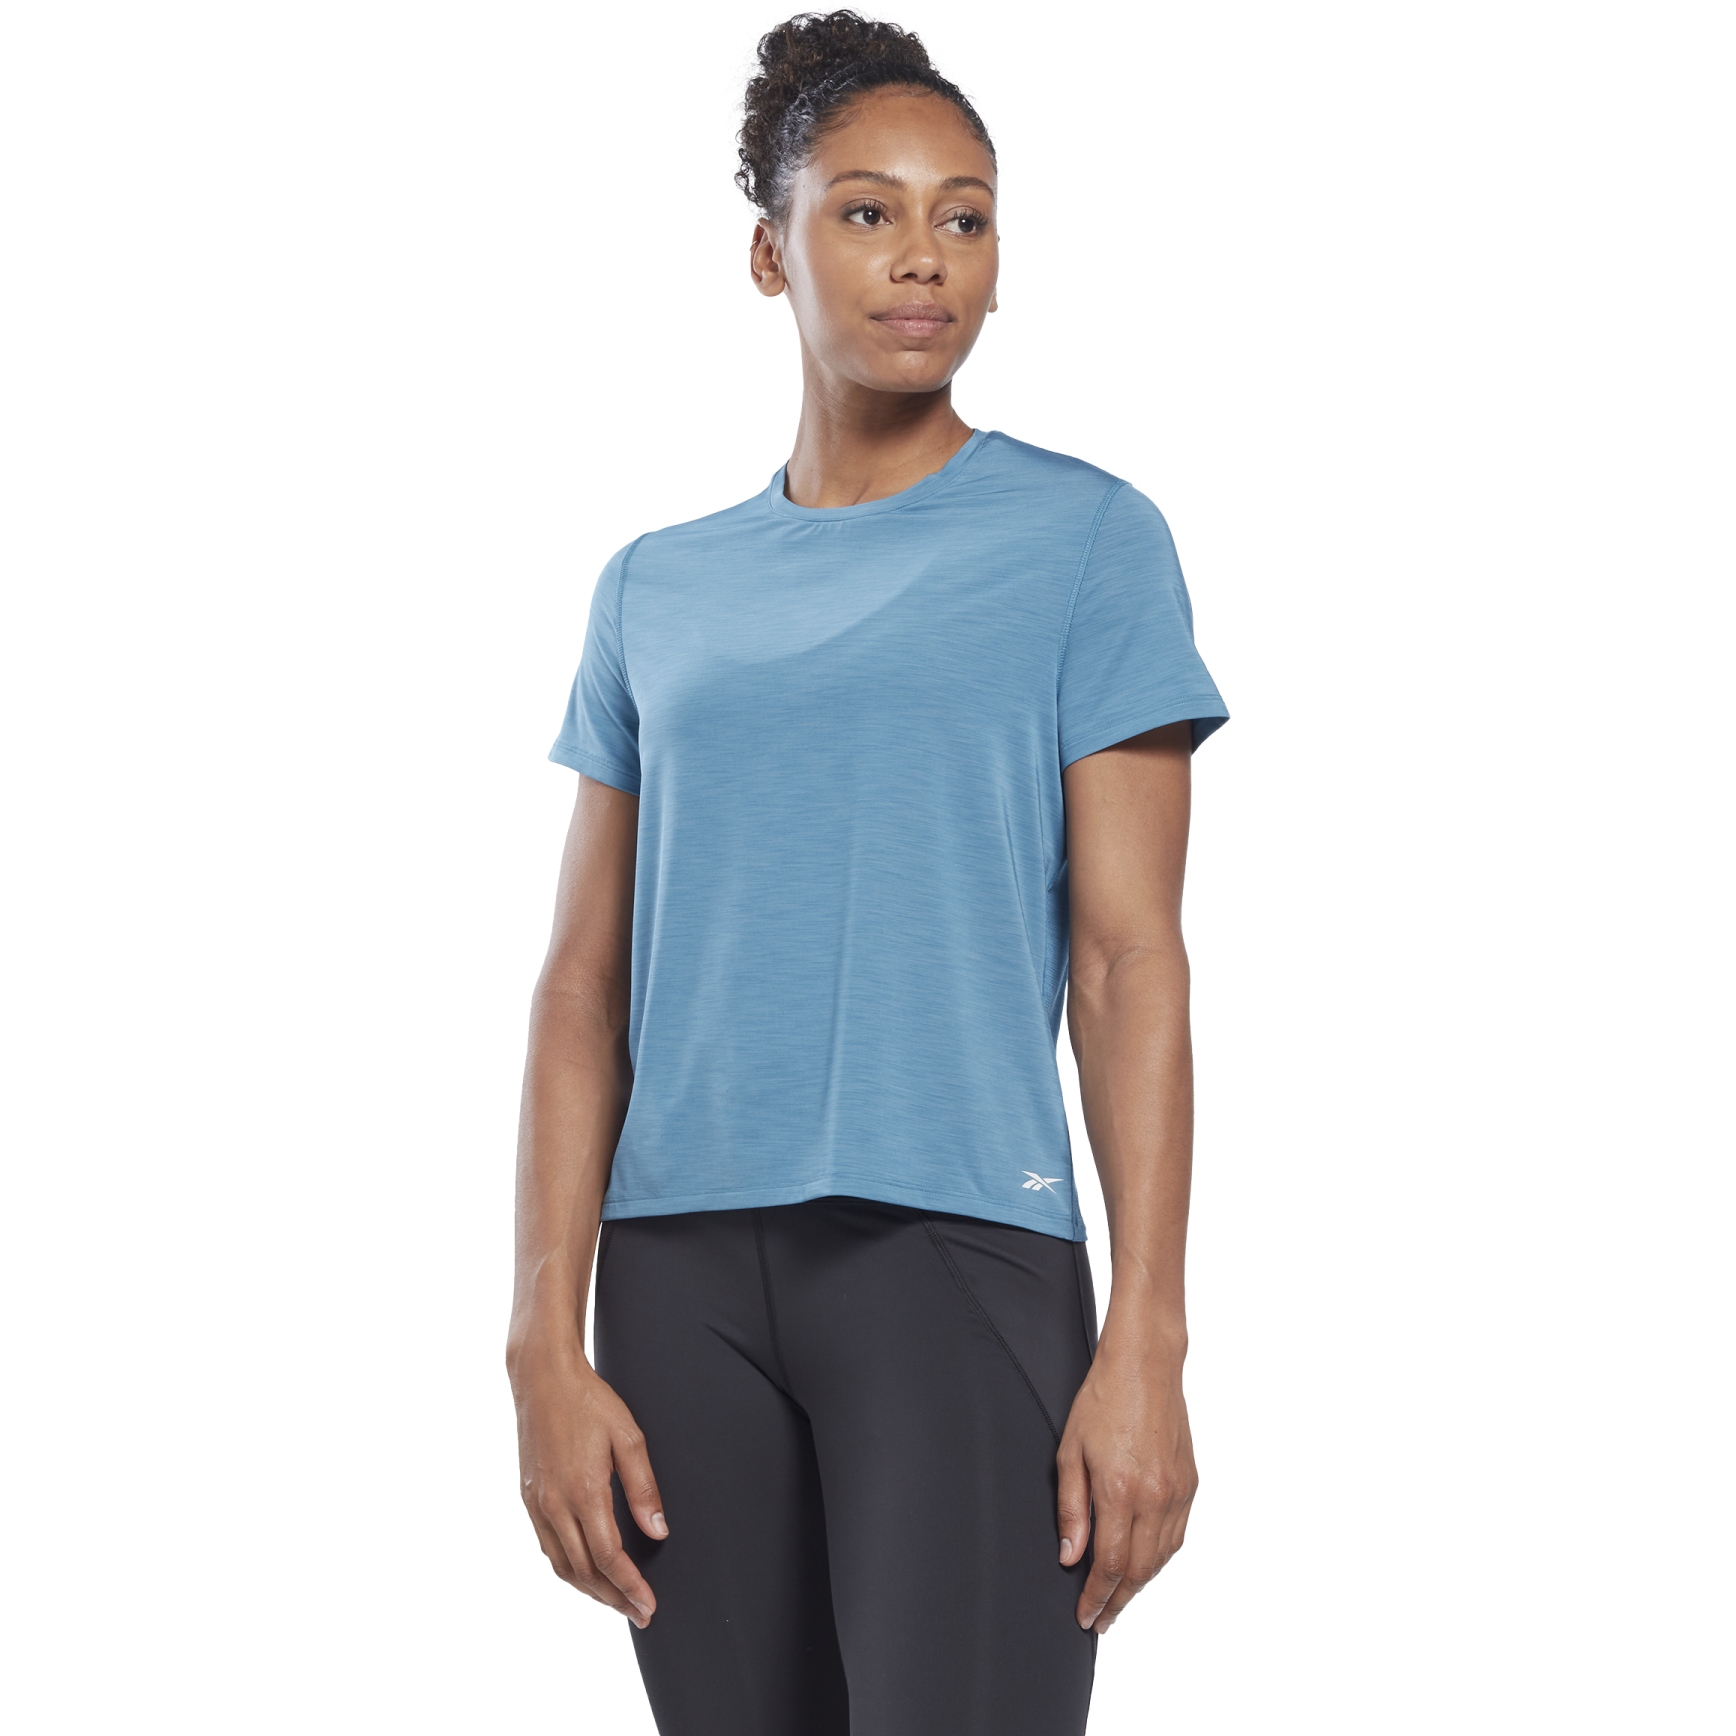 Picture of Reebok ACTIVCHILL Athlethic Tee Women - steely blue